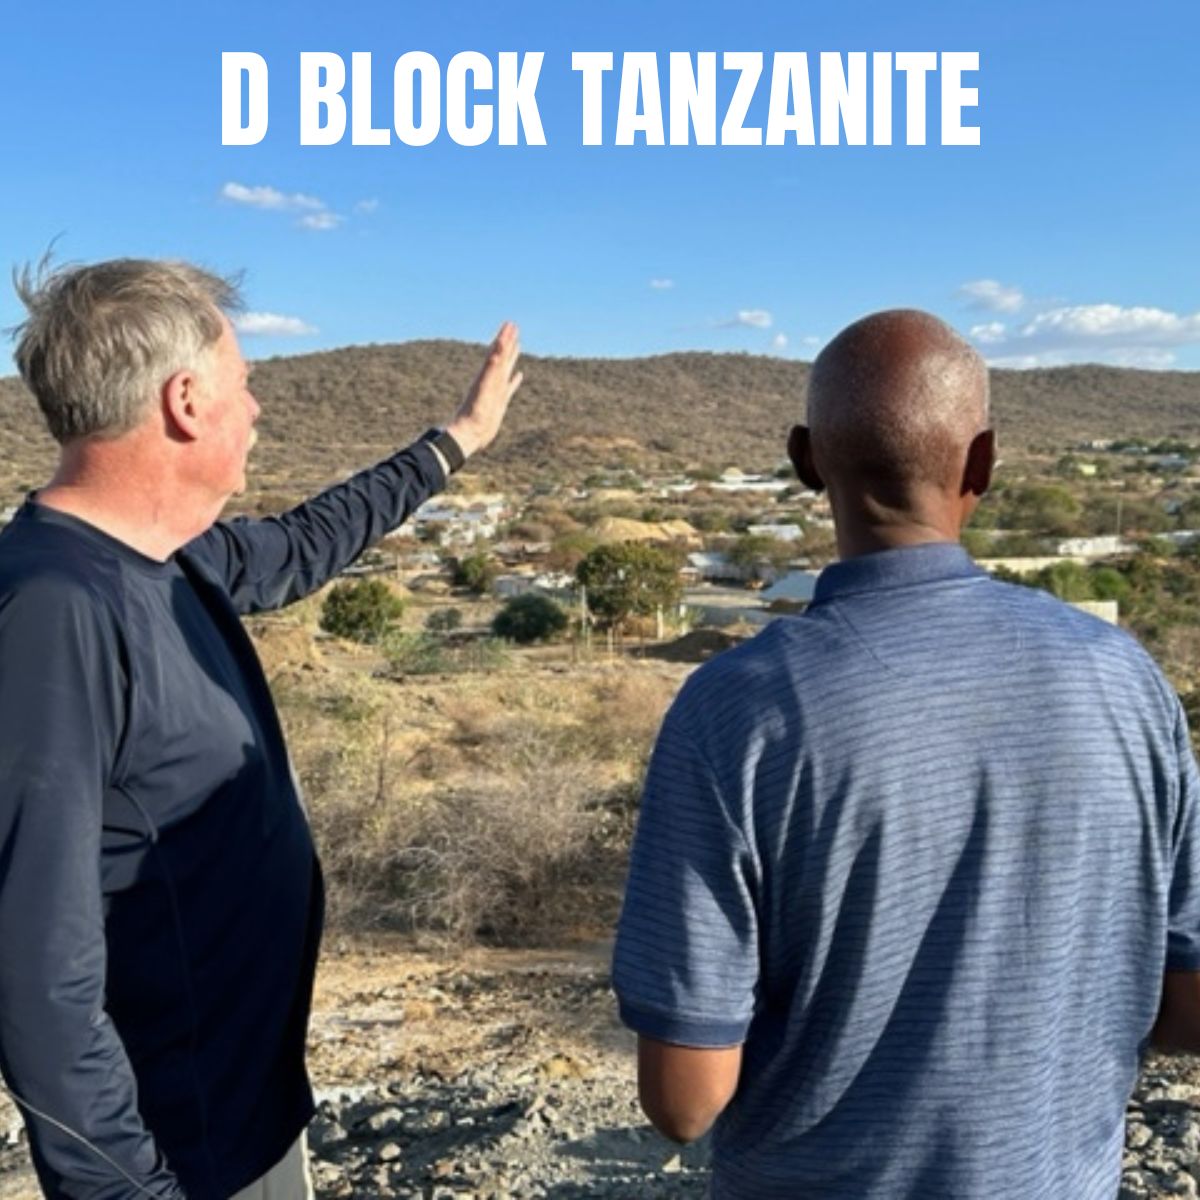 D Block Tanzanite: Does it Produce the Best Color?